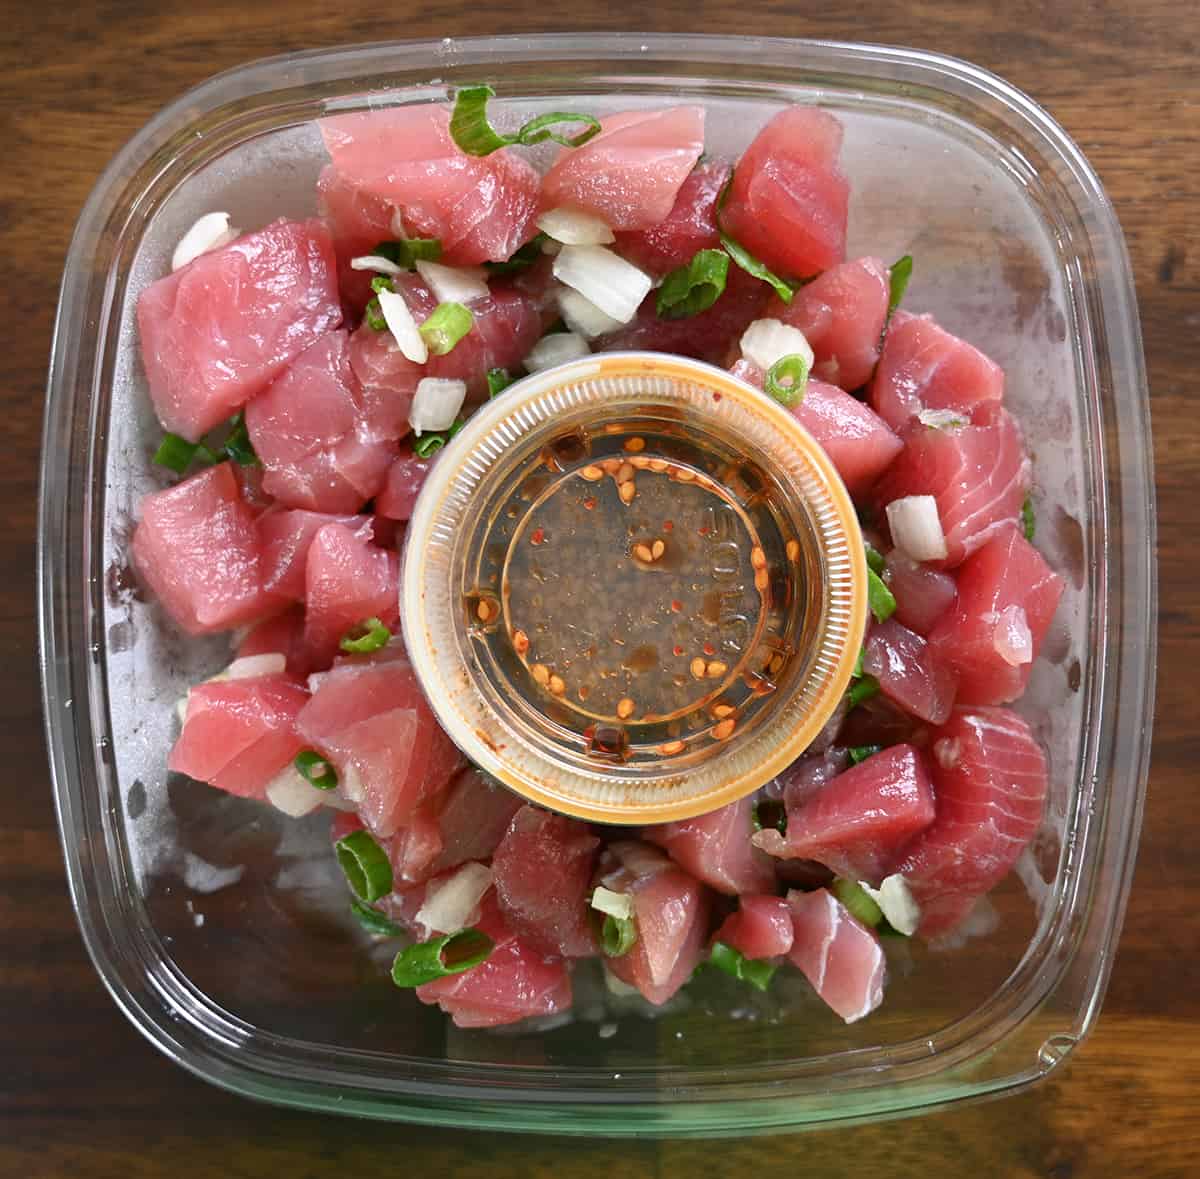 Top down image of an open container of the fresh shoyu poke. There's a container of sauce sitting on the top of the poke.